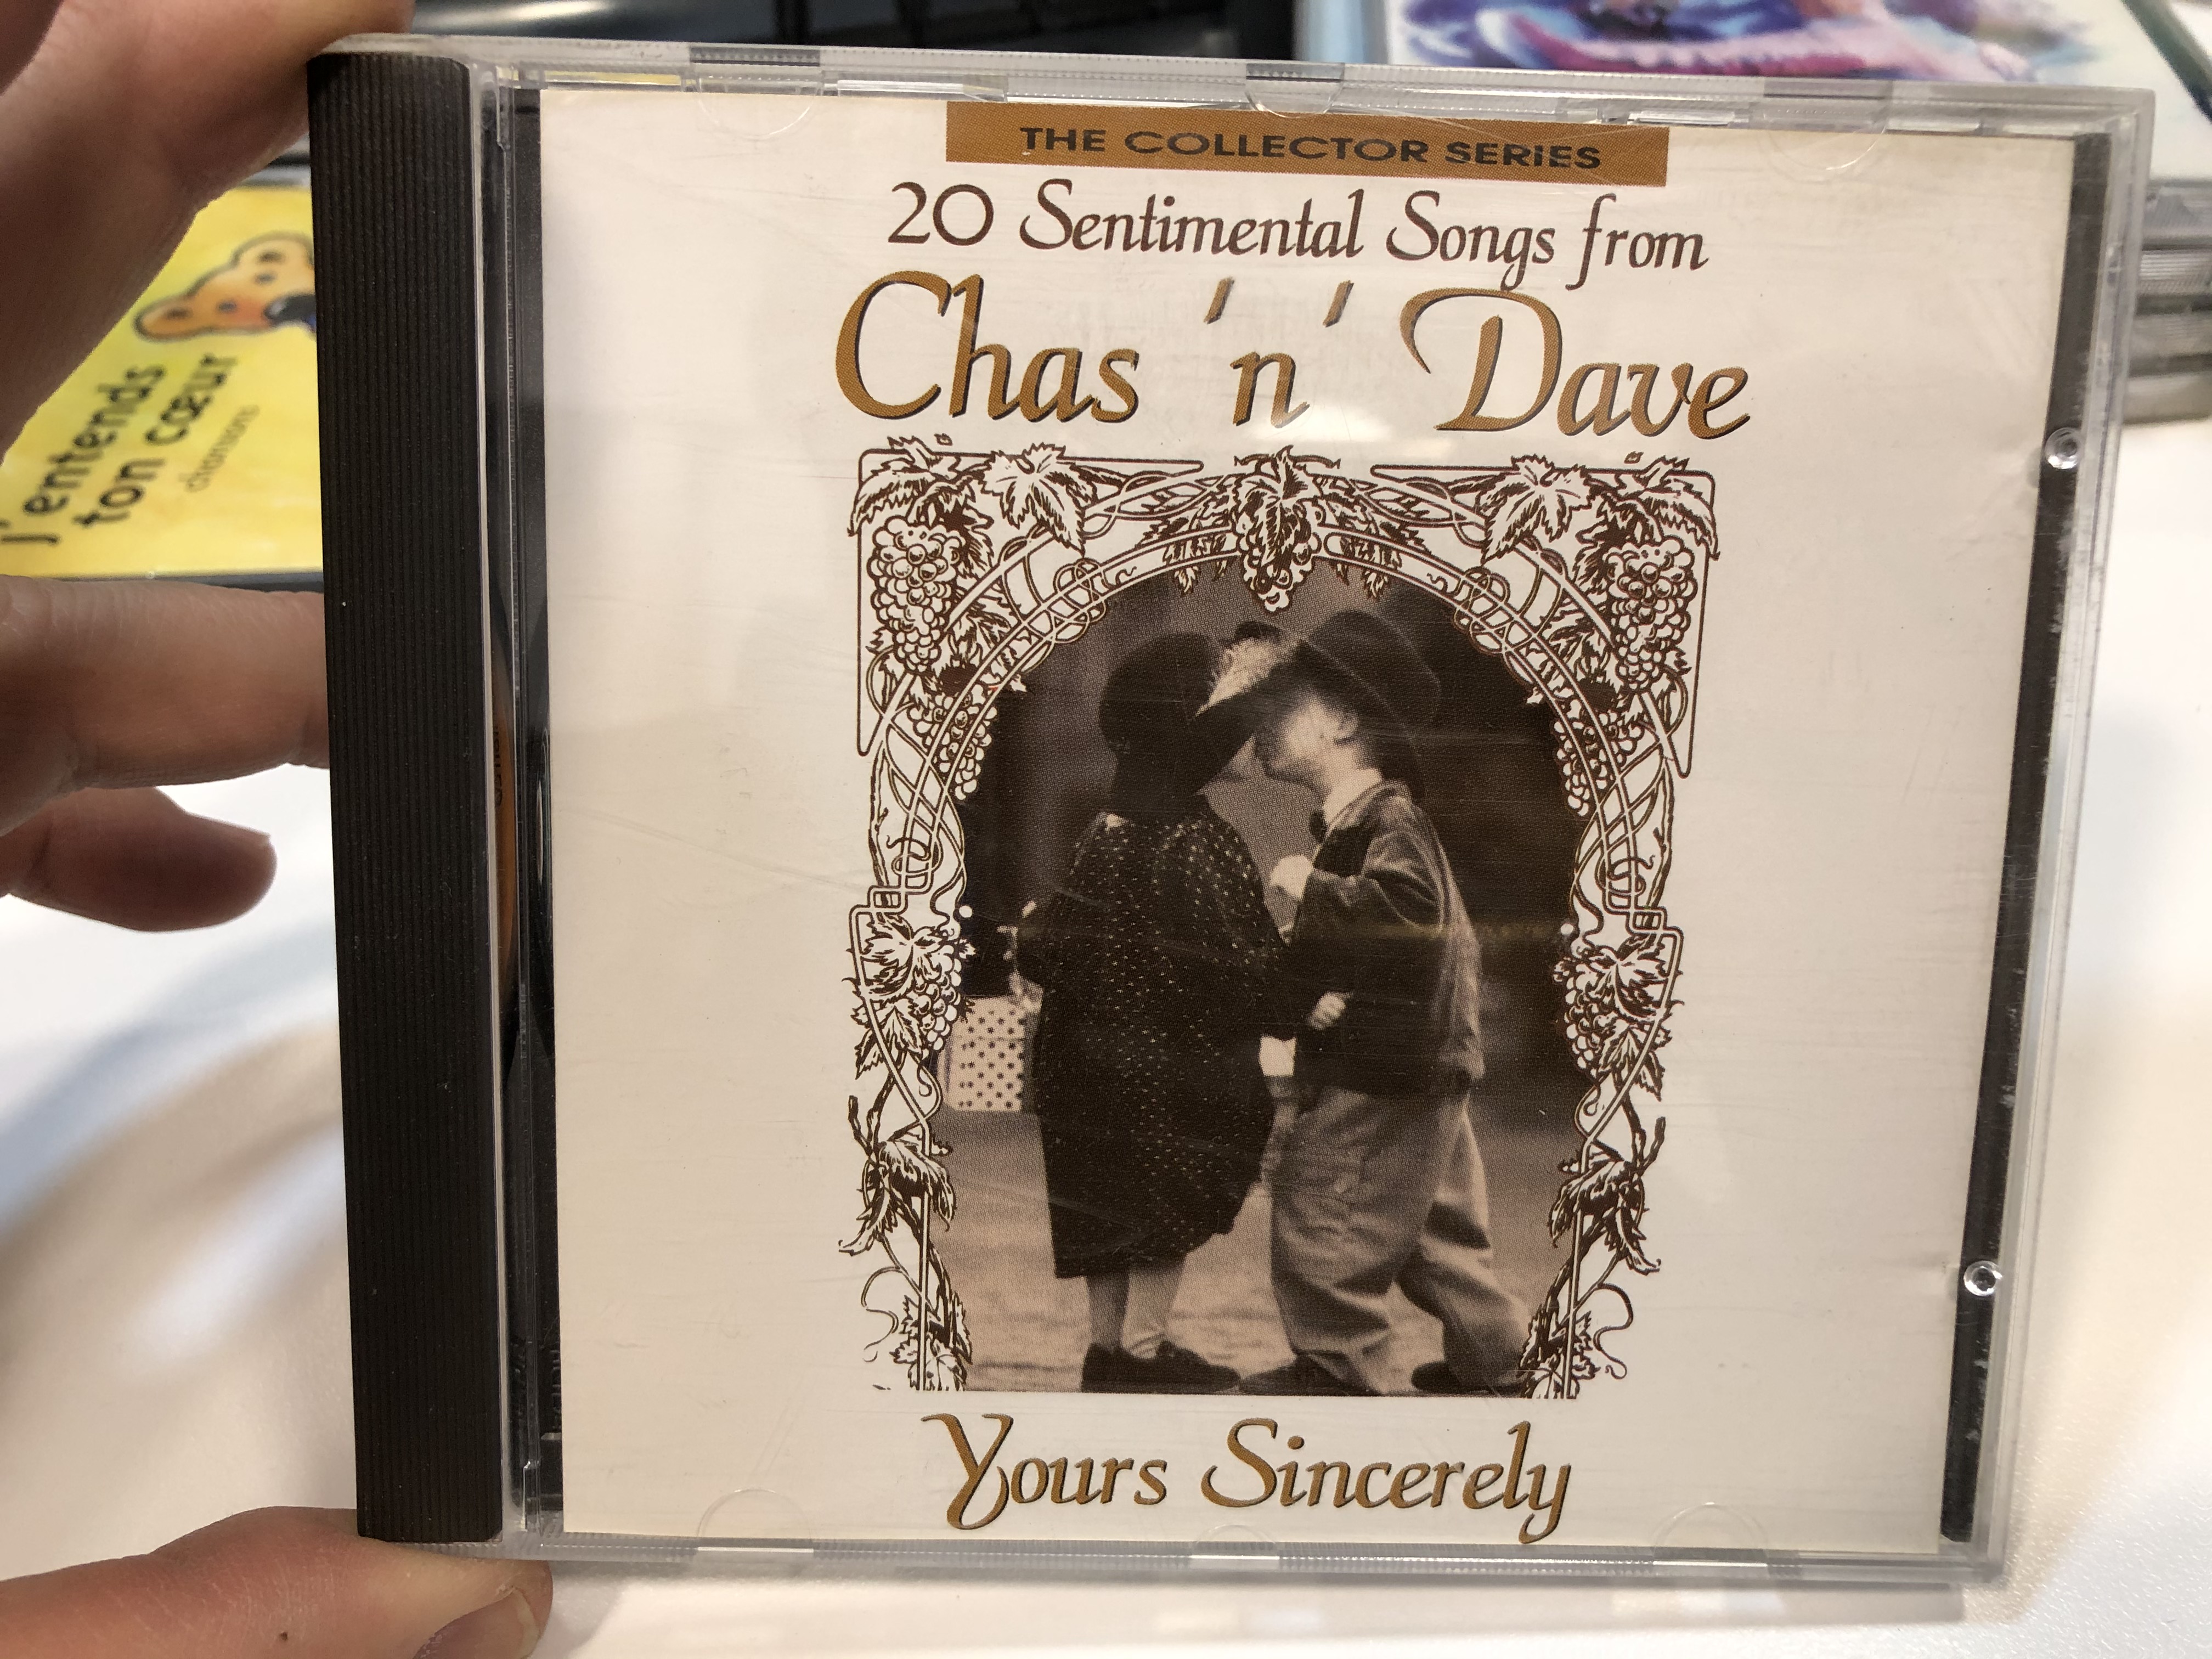 20-sentimental-songs-from-chas-n-dave-yours-sincerely-the-collector-series-castle-communications-audio-cd-1992-ccscd-334-1-.jpg